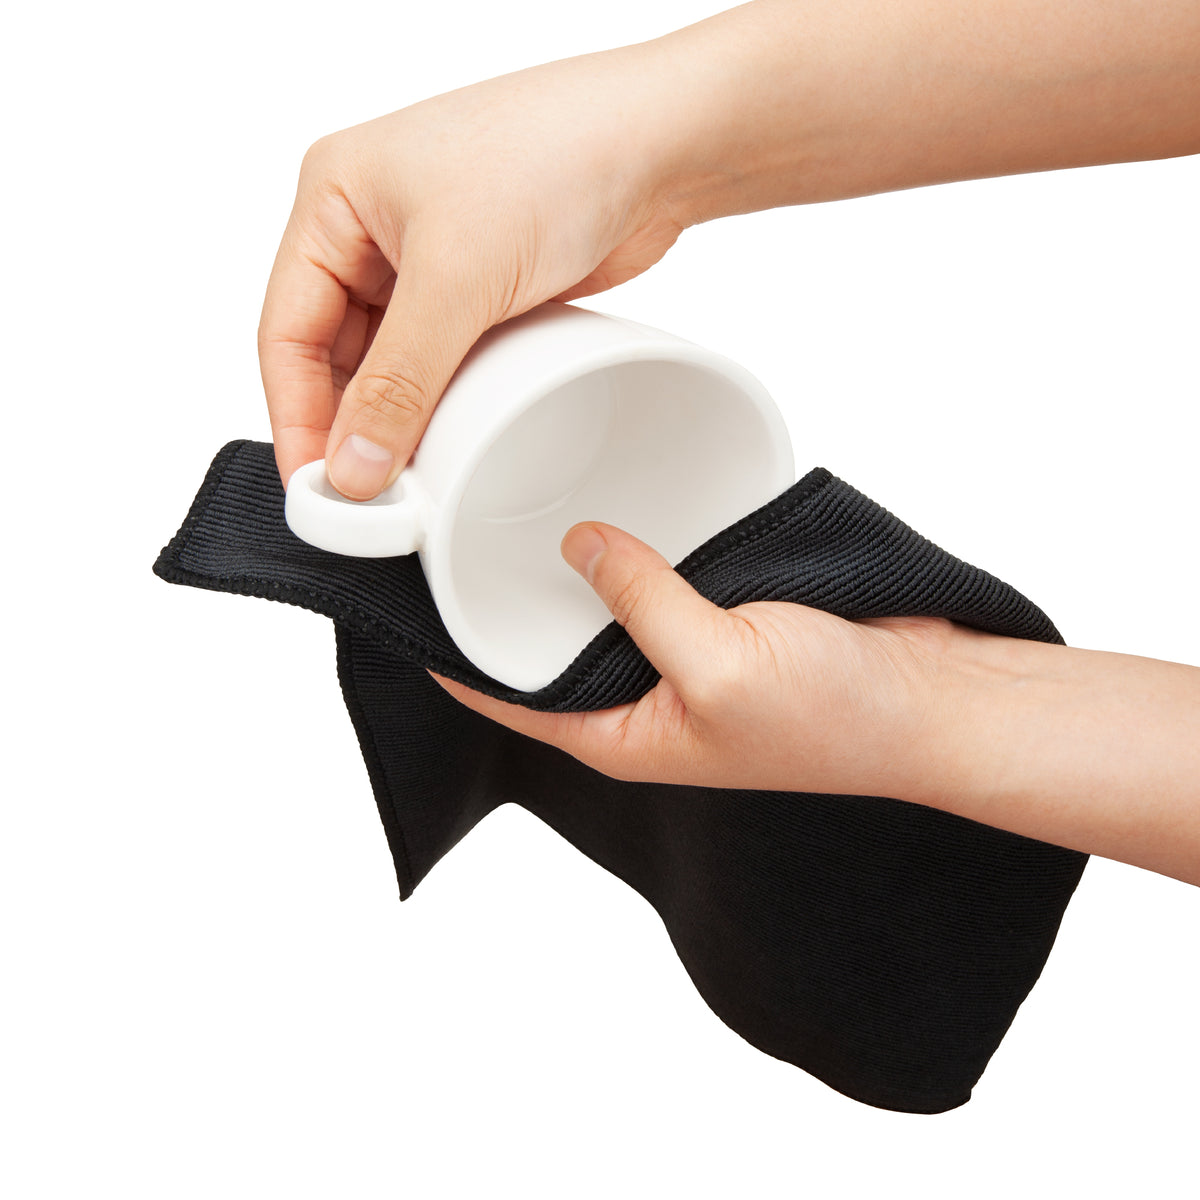 Cleaning with the EspressoWorks 100% Microfiber Cleaning Cloths (2 Pack)